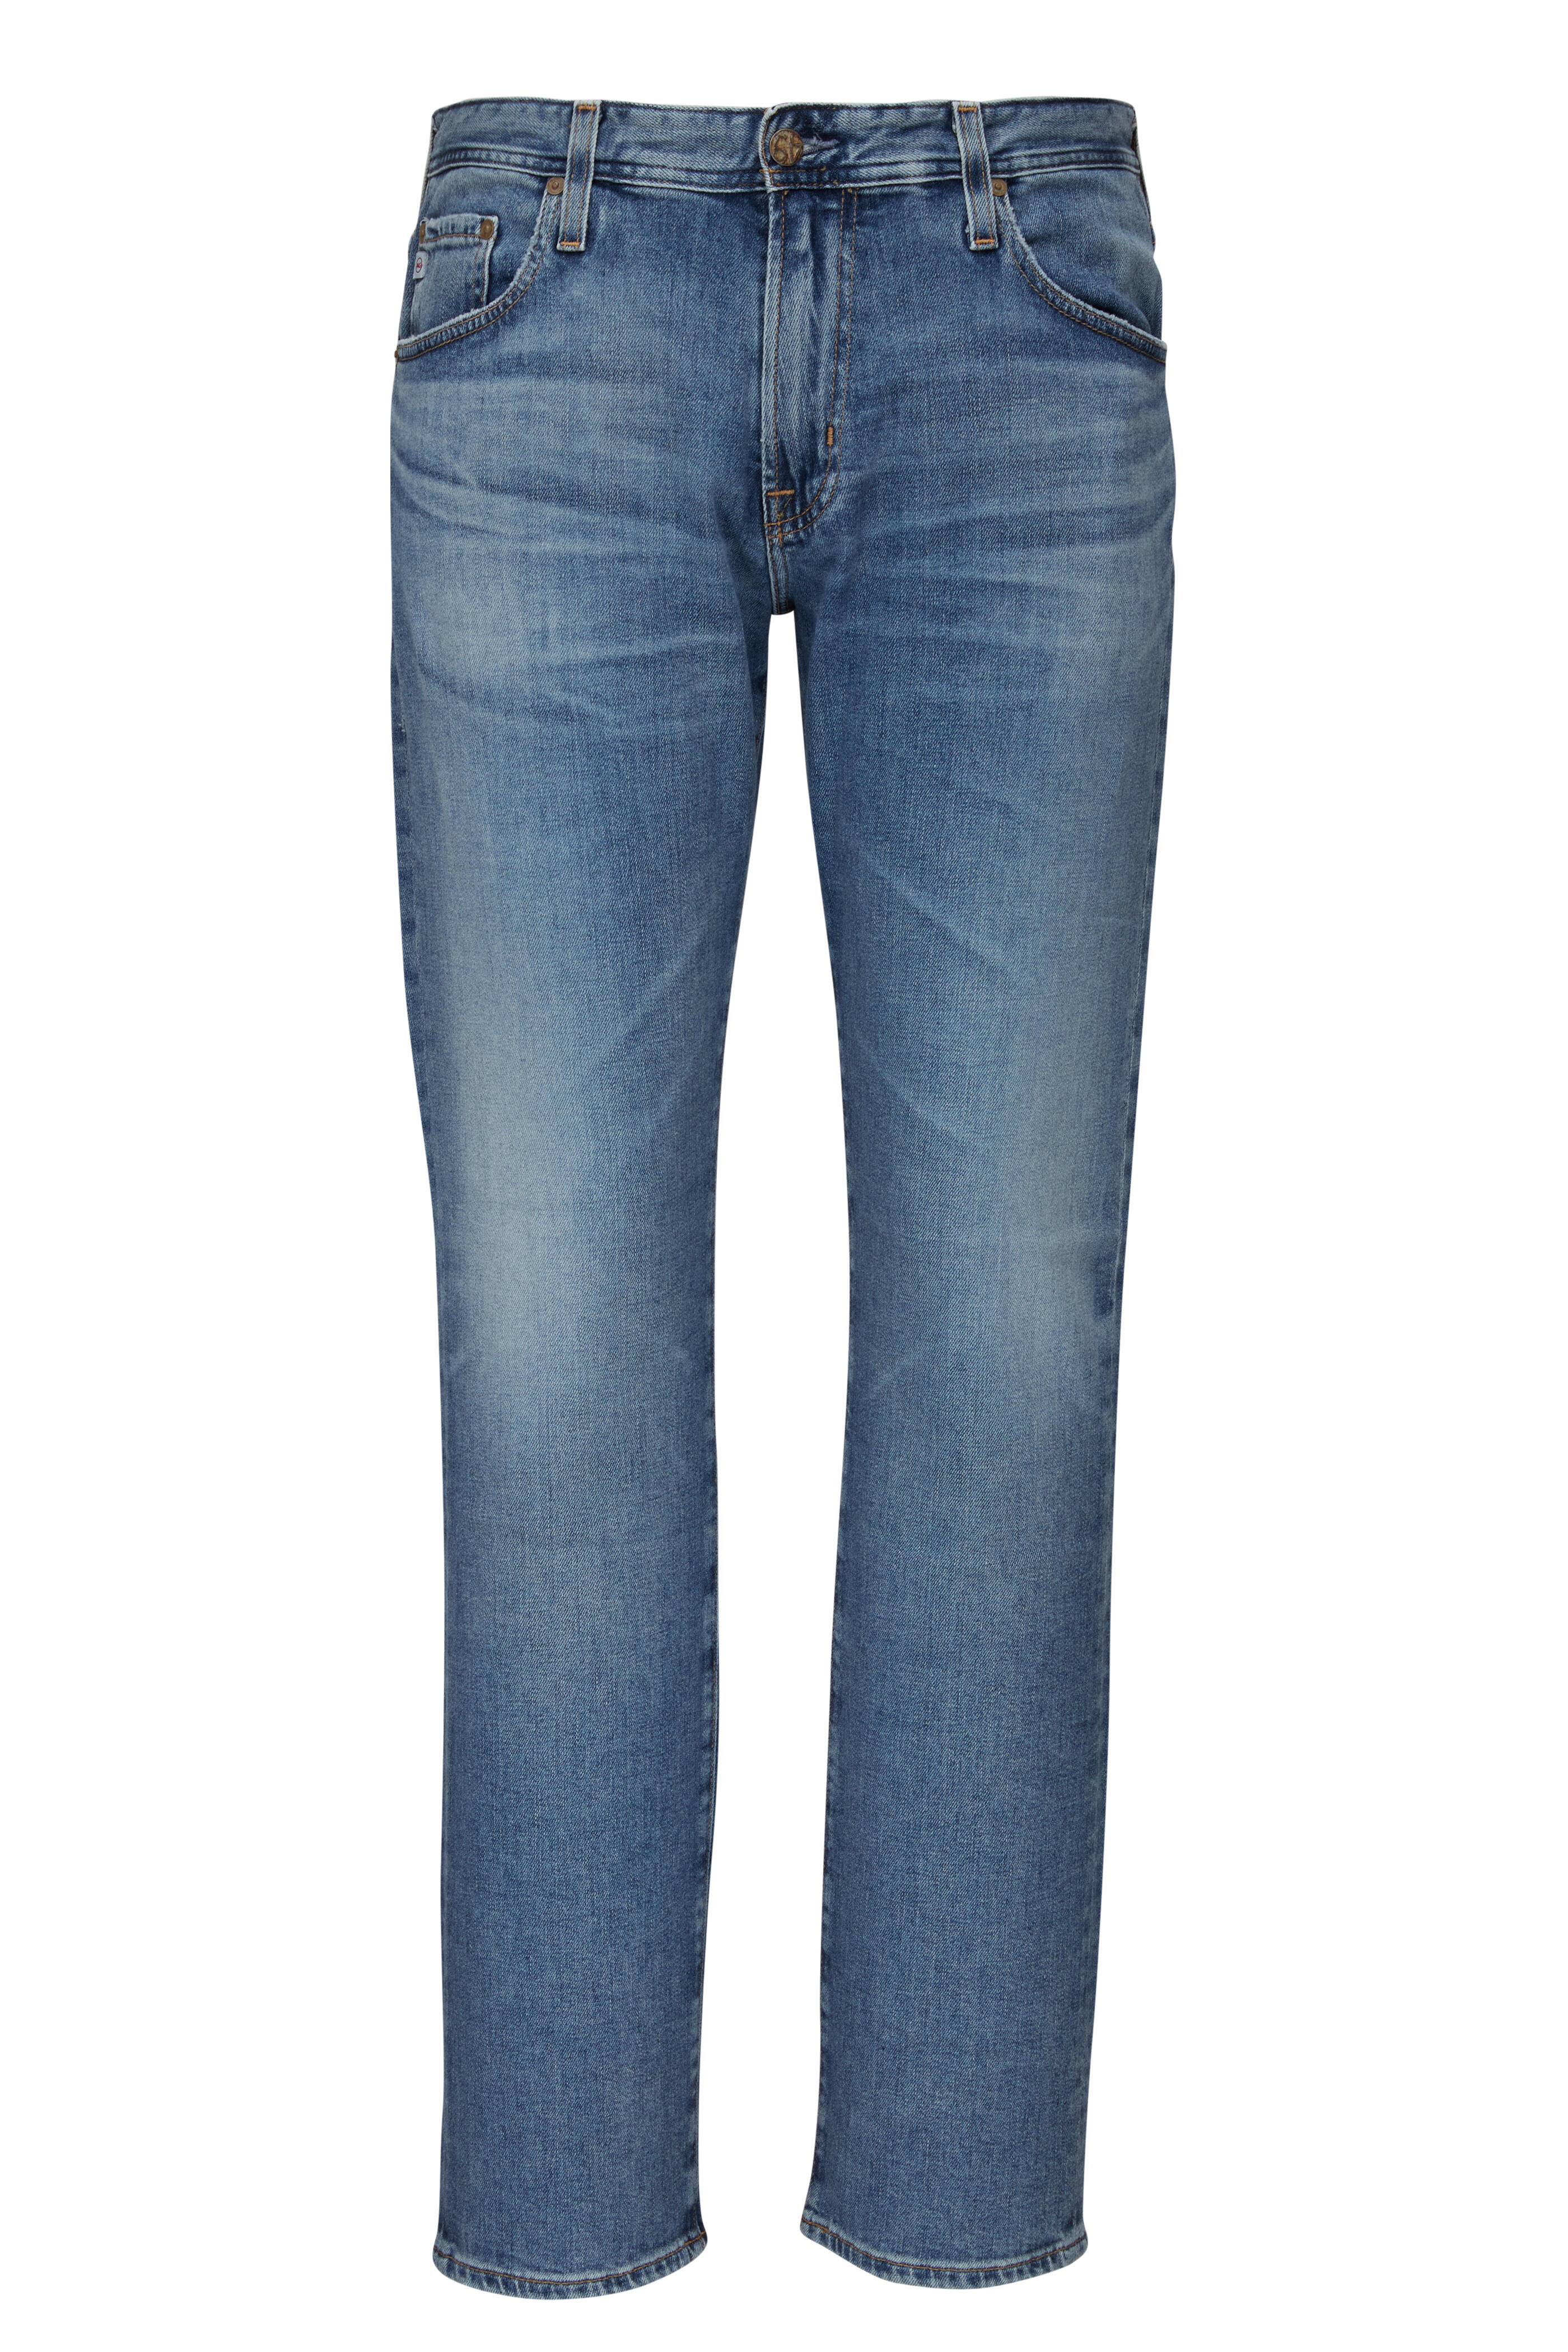 AG - The Graduate Light Wash Tailored Leg Jean | Mitchell Stores